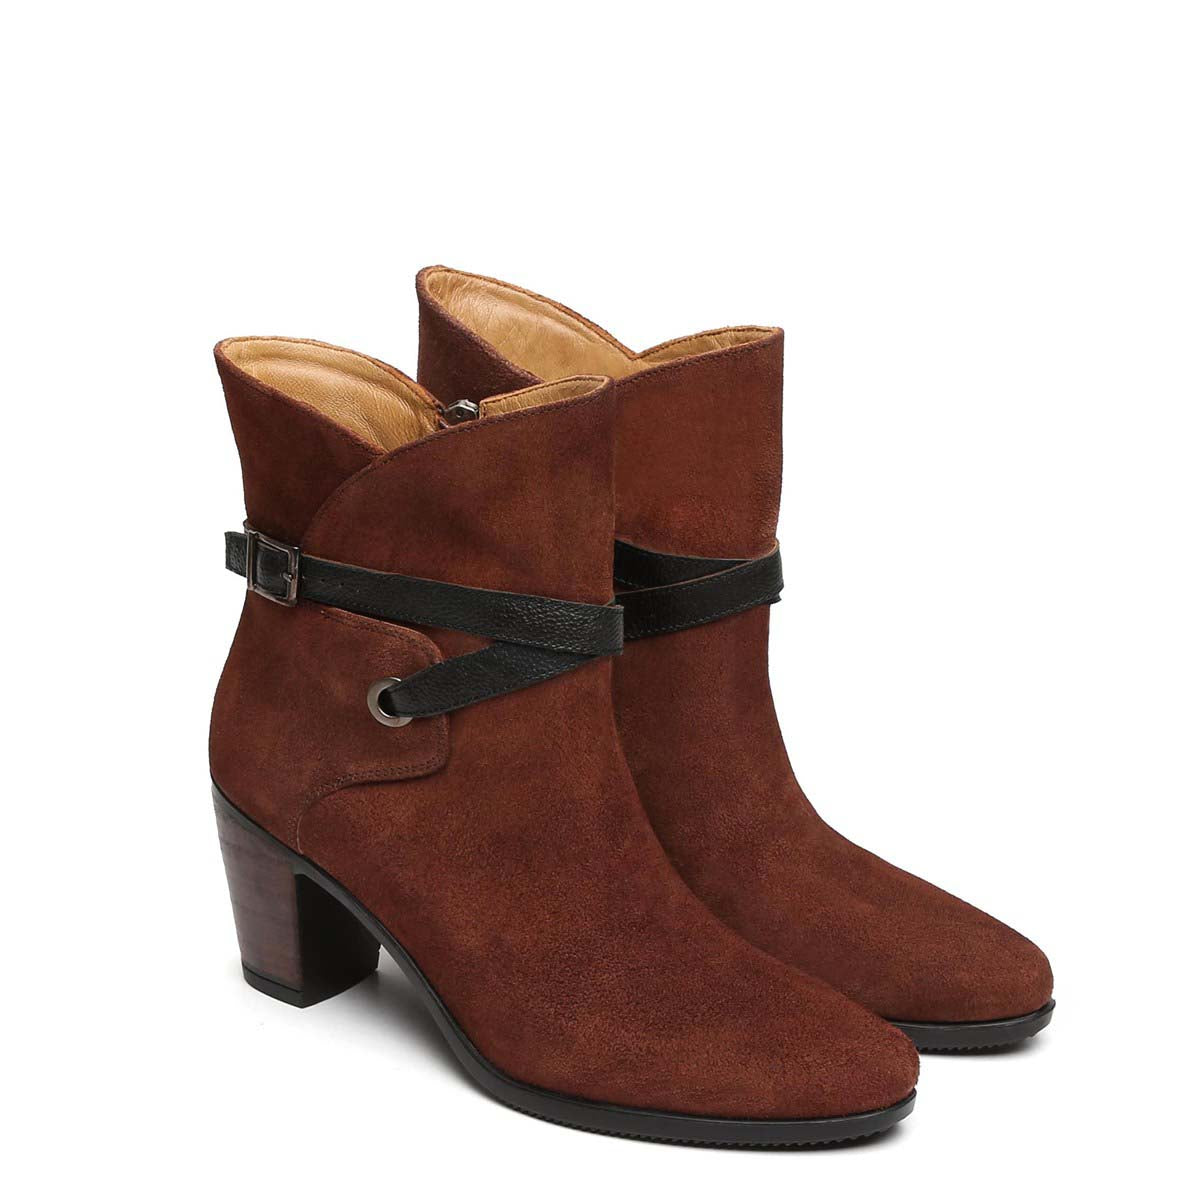 Brown Suede Leather With Black Strap Ladies Boots By Brune & Bareskin